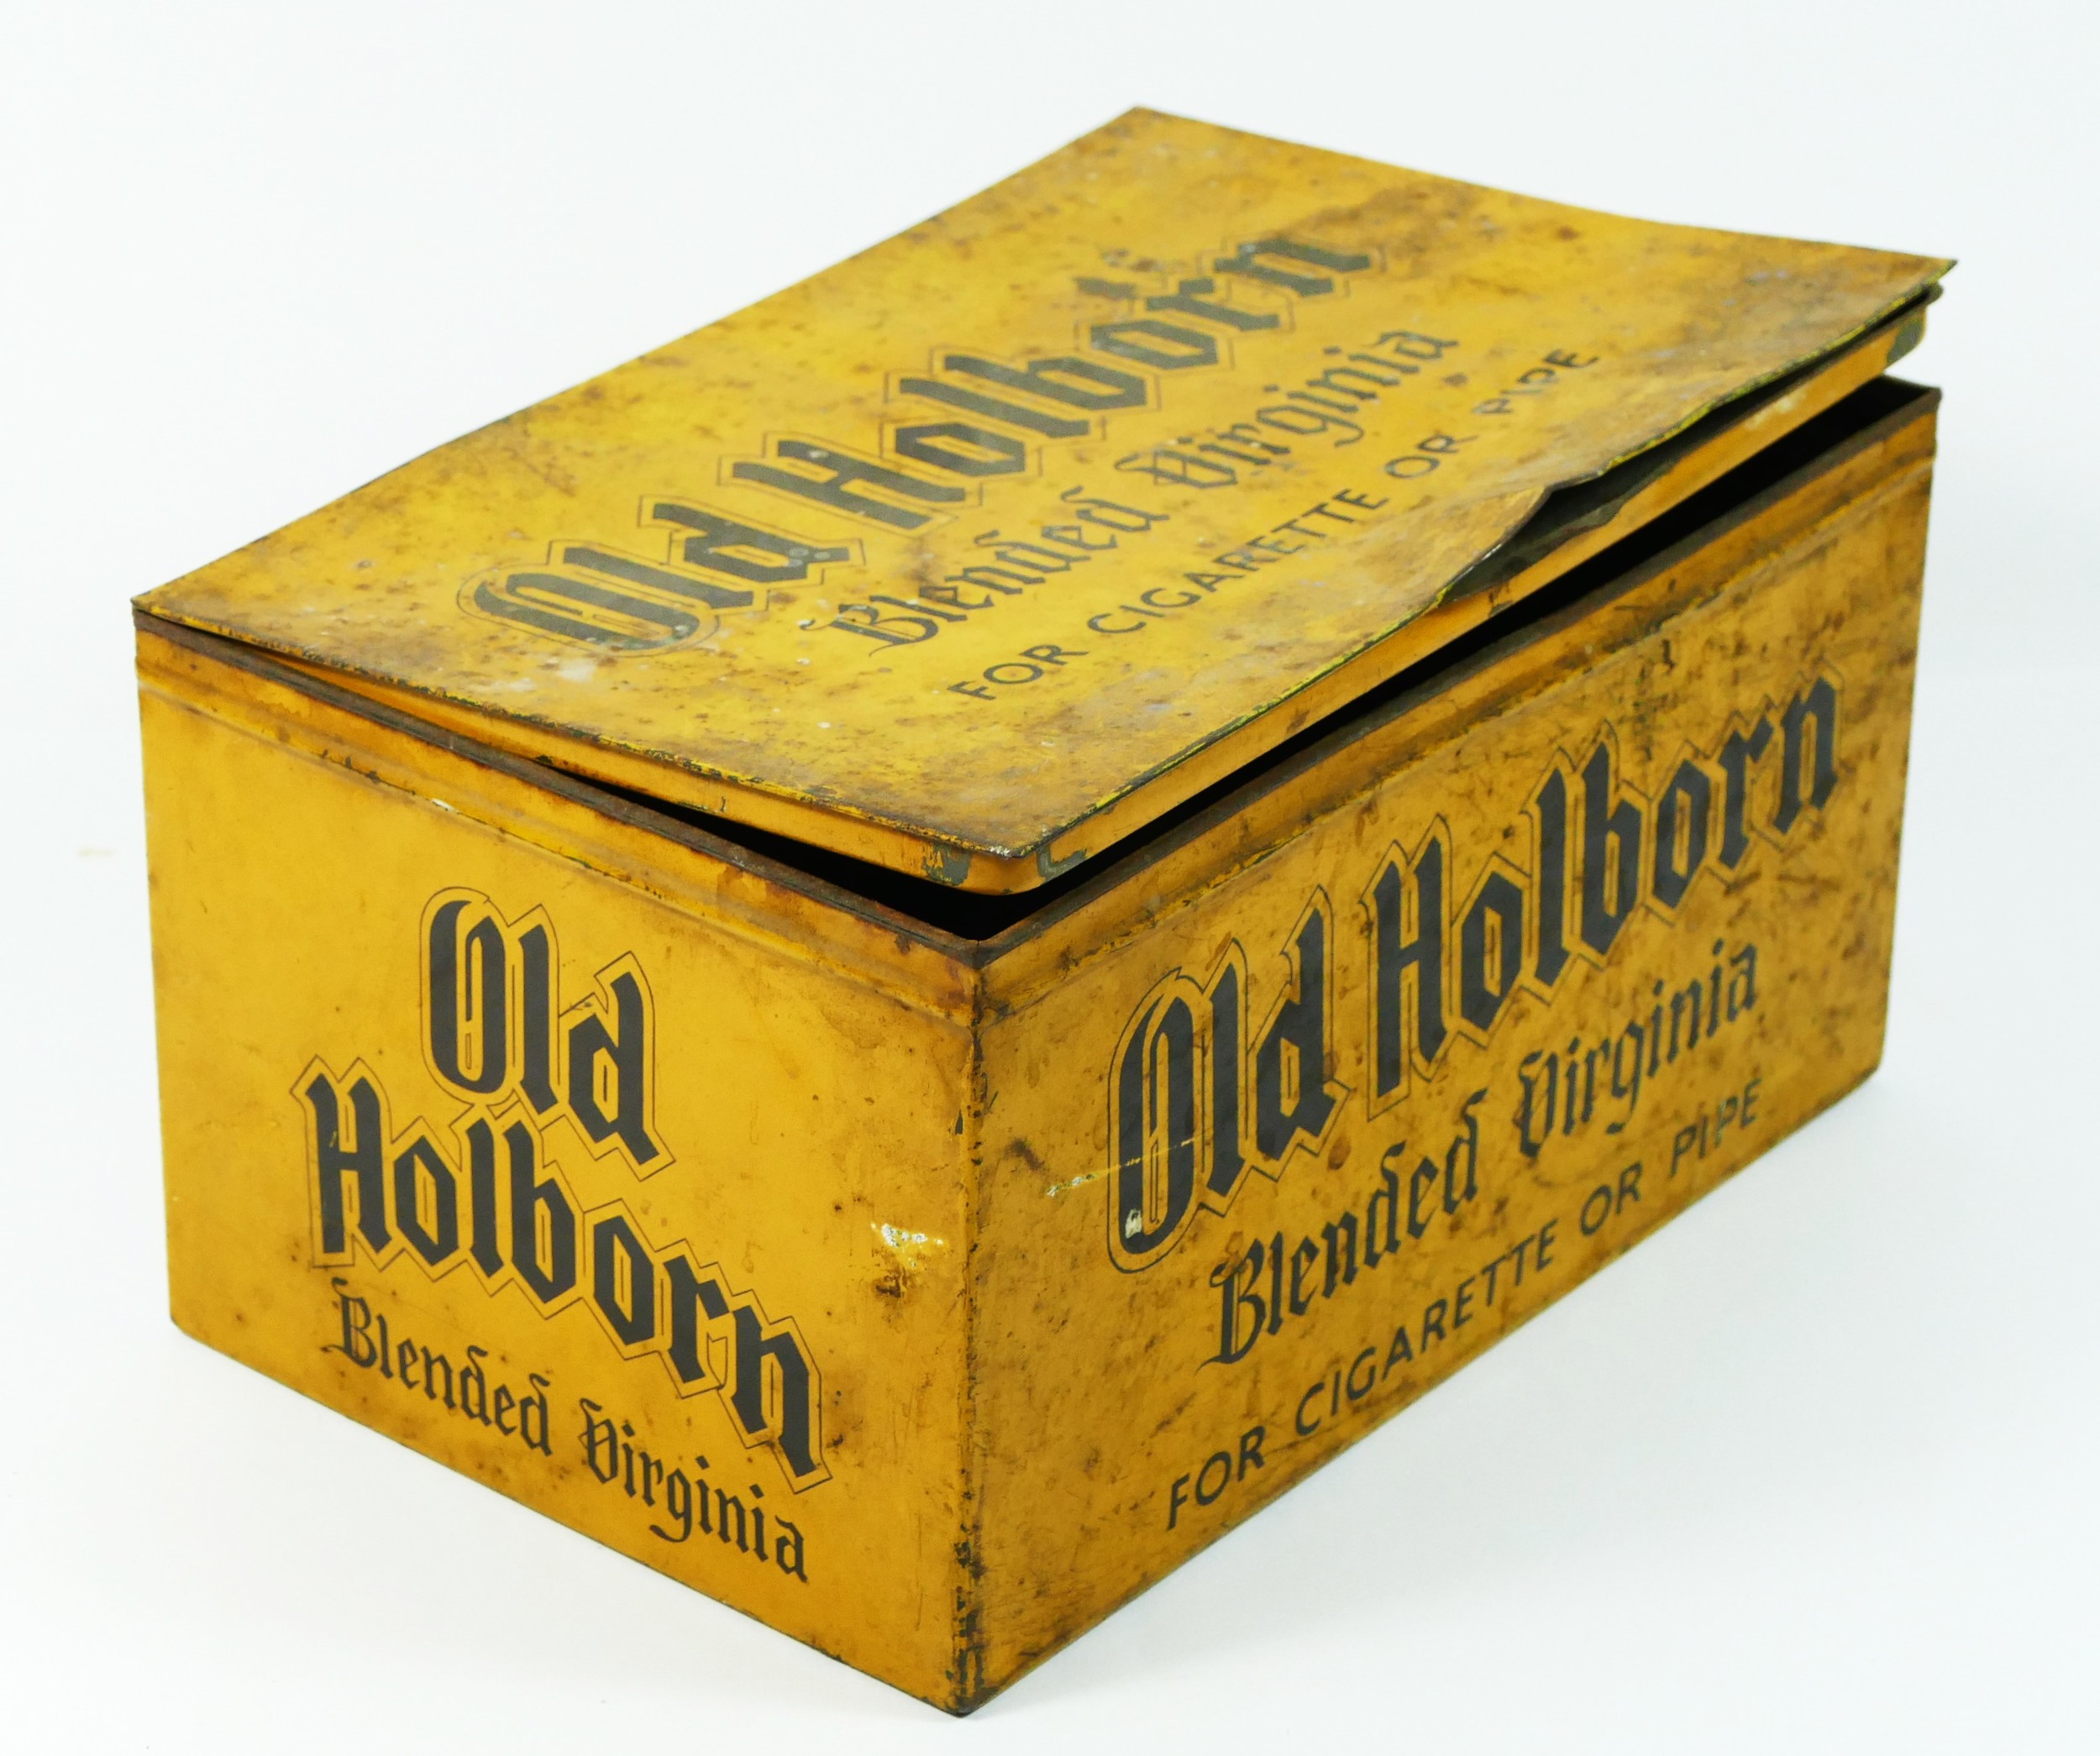 Old Holborn, Blended Virginia, tobacco tin, 4.5 x 22 x 11cm. - Image 2 of 3